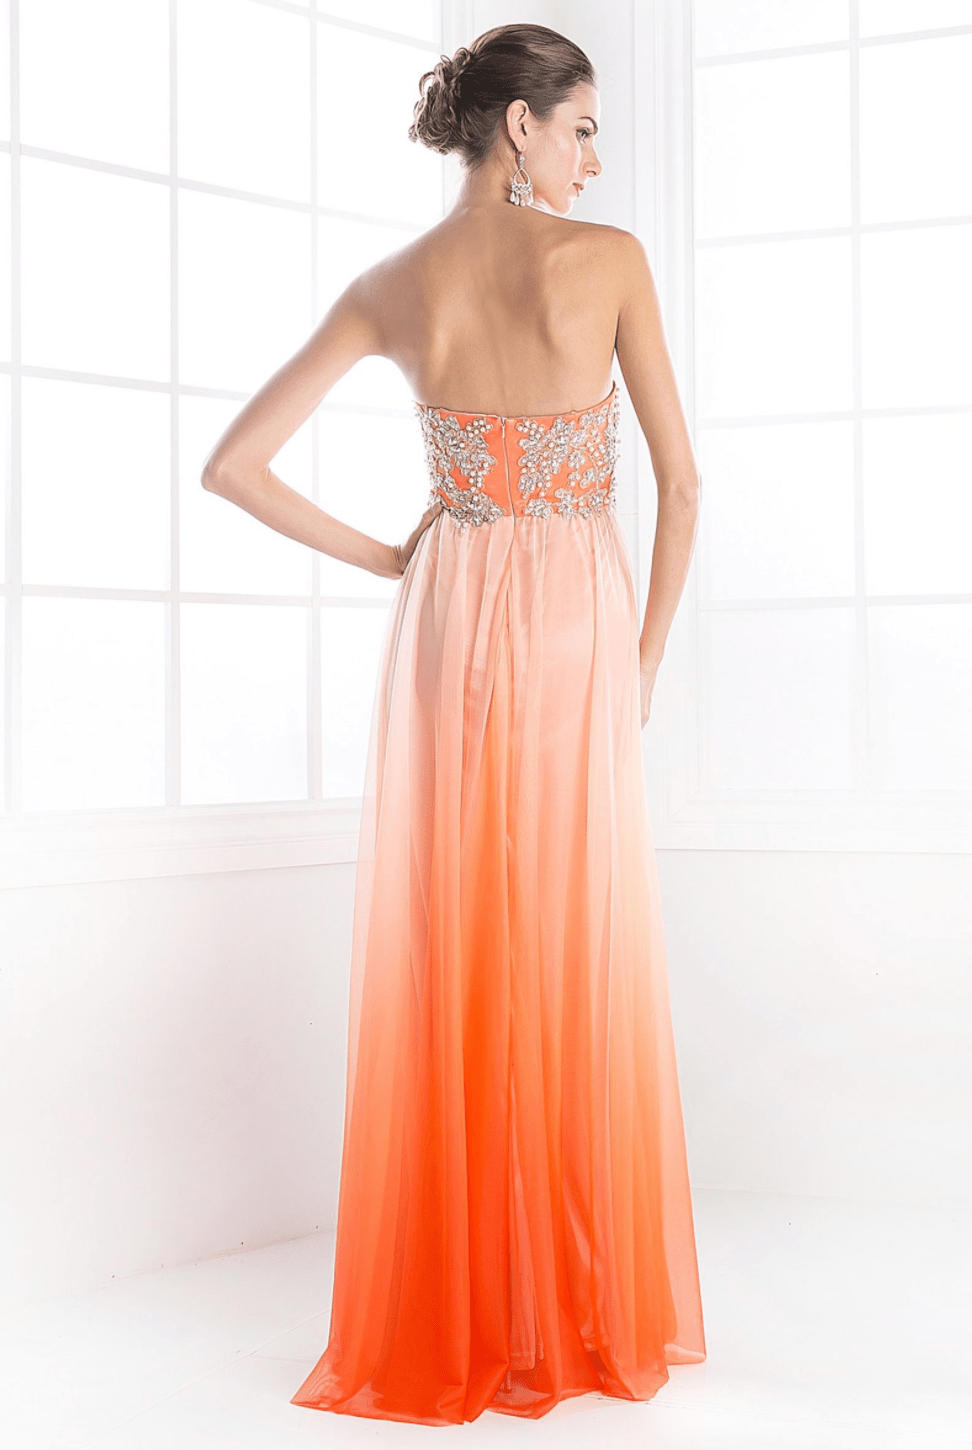 Strapless Ombre Crystal Beaded Dress by Cinderella Divine - NORMA REED